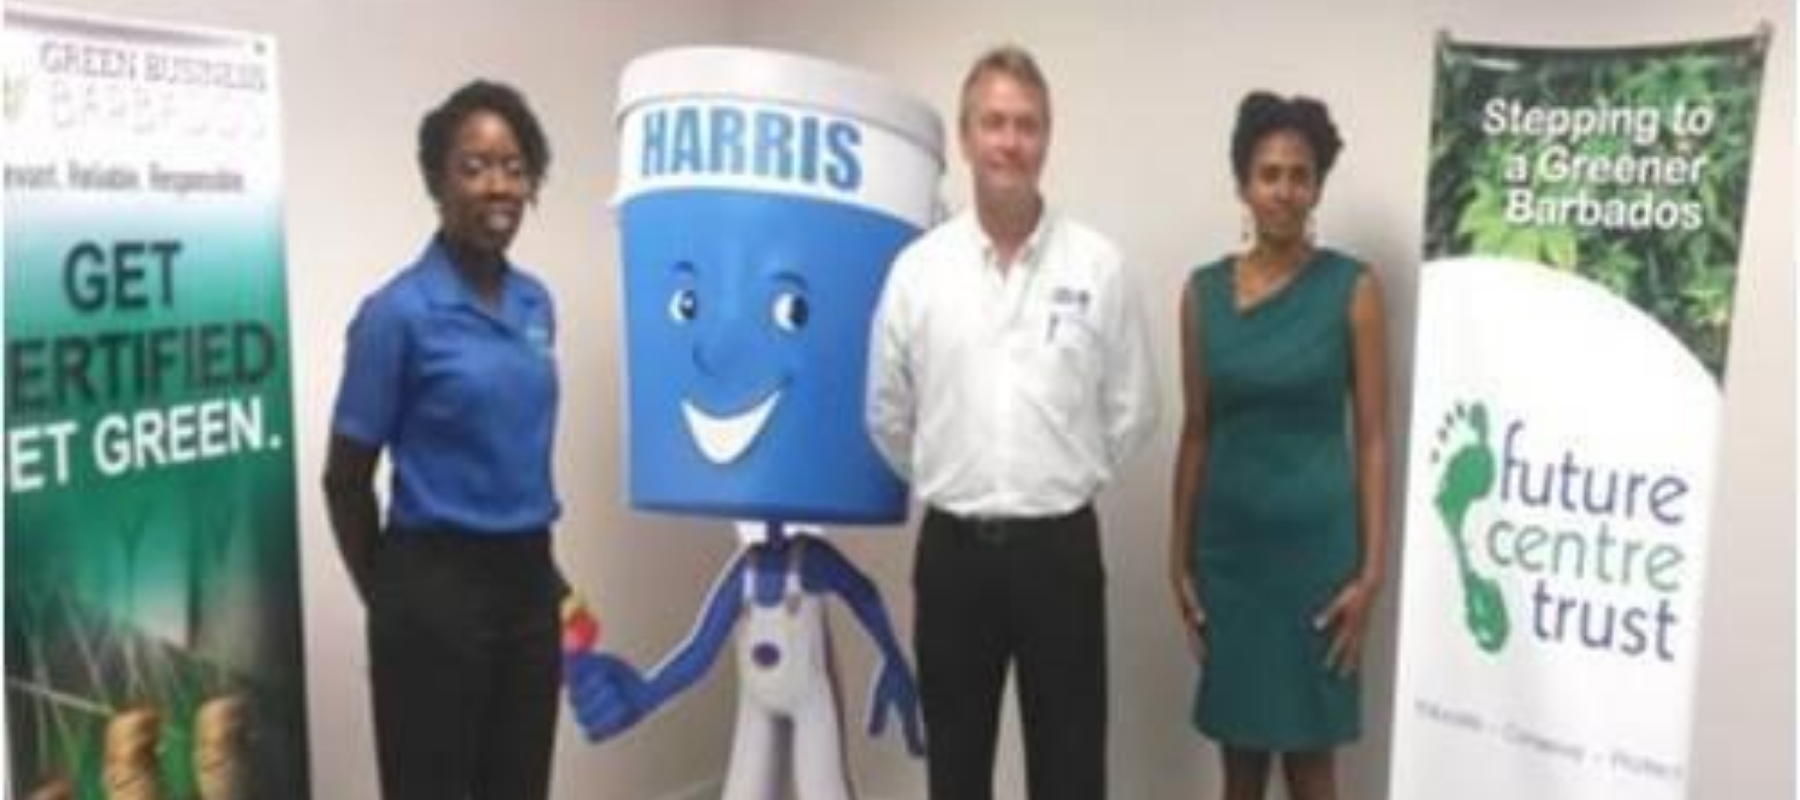 'Green Award' for Harris Paints